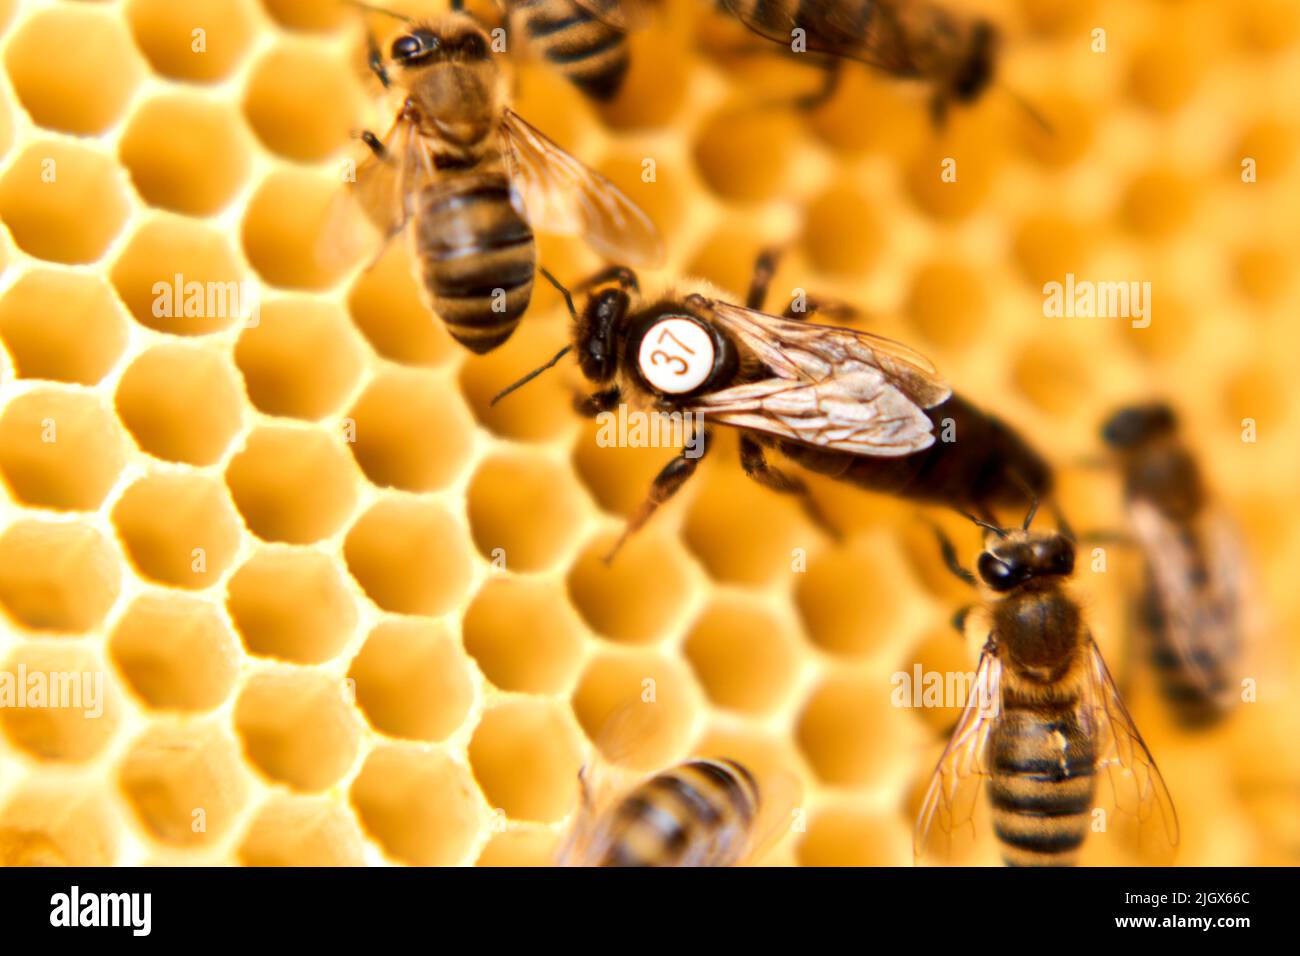 Queen bee in an artificial hive Stock Photo